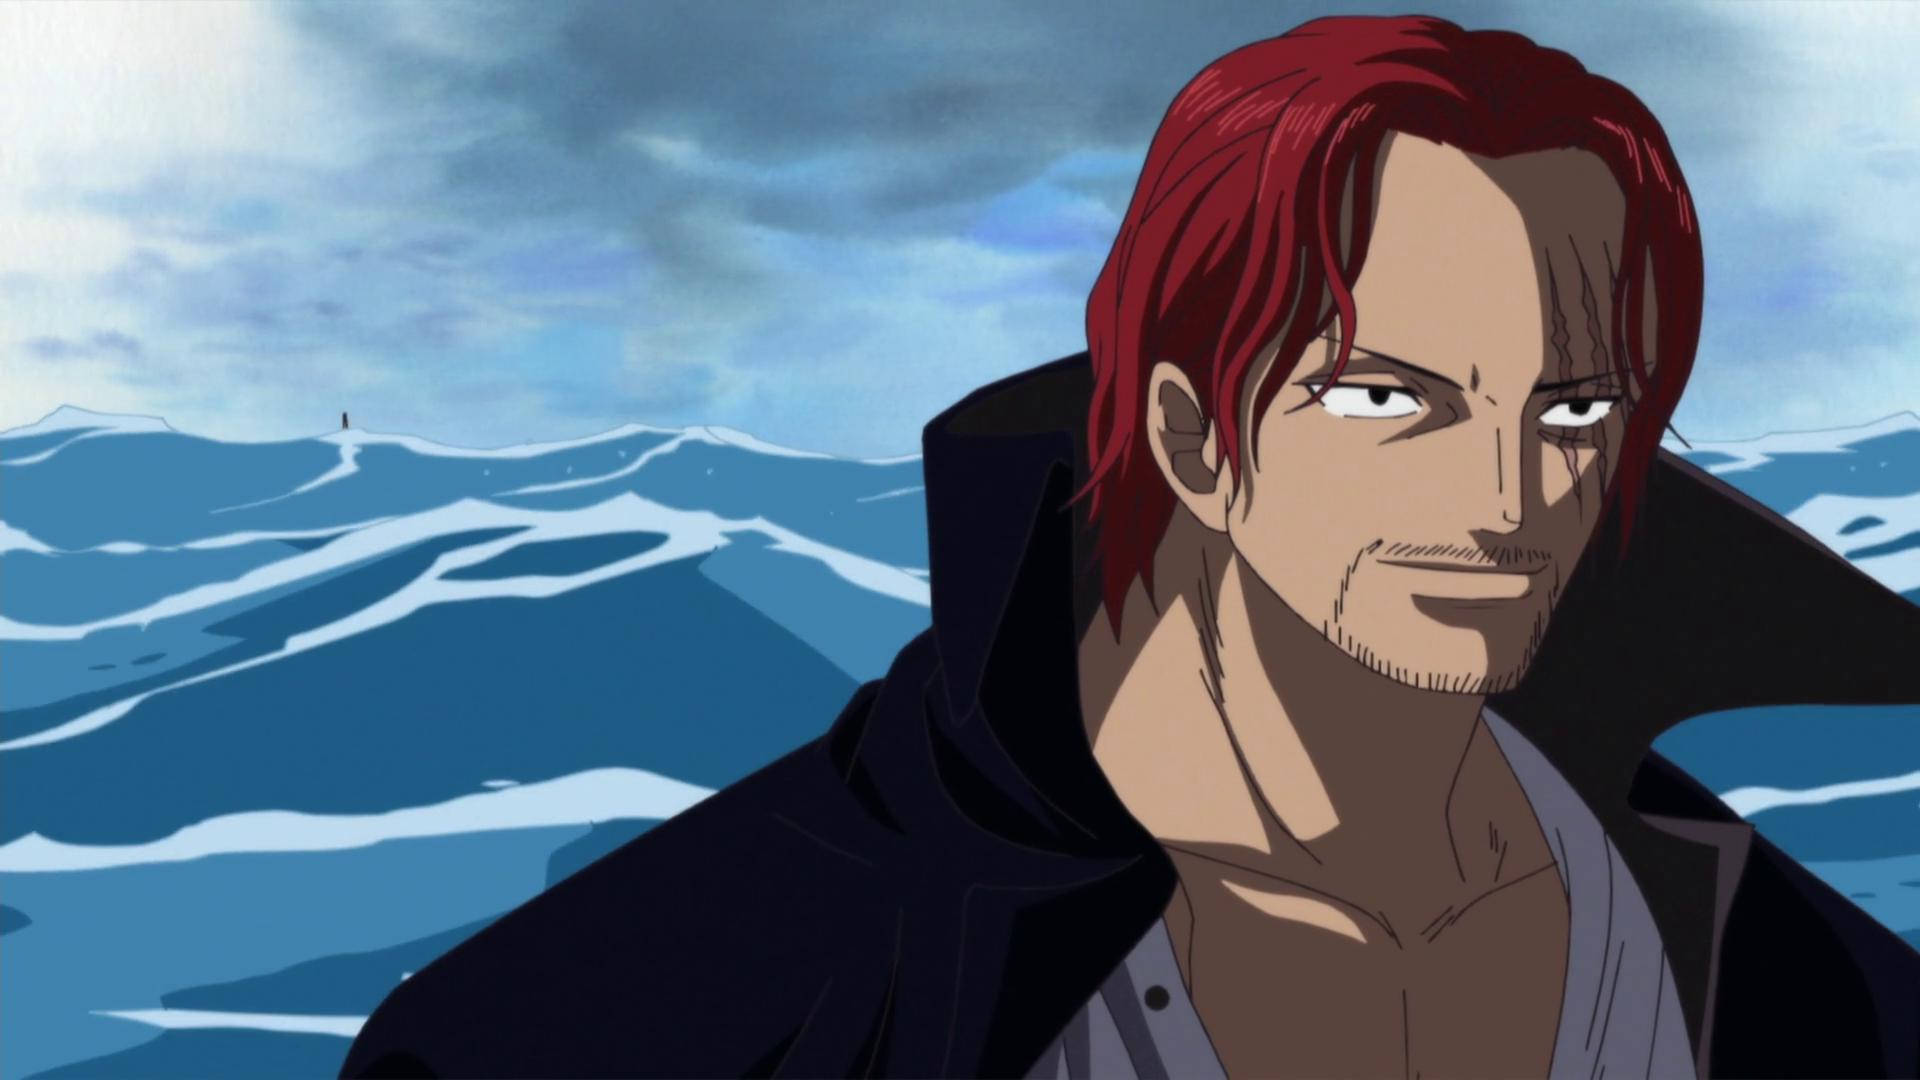 Cool and Powerful - Shanks of One Piece at the Grand Line Wallpaper